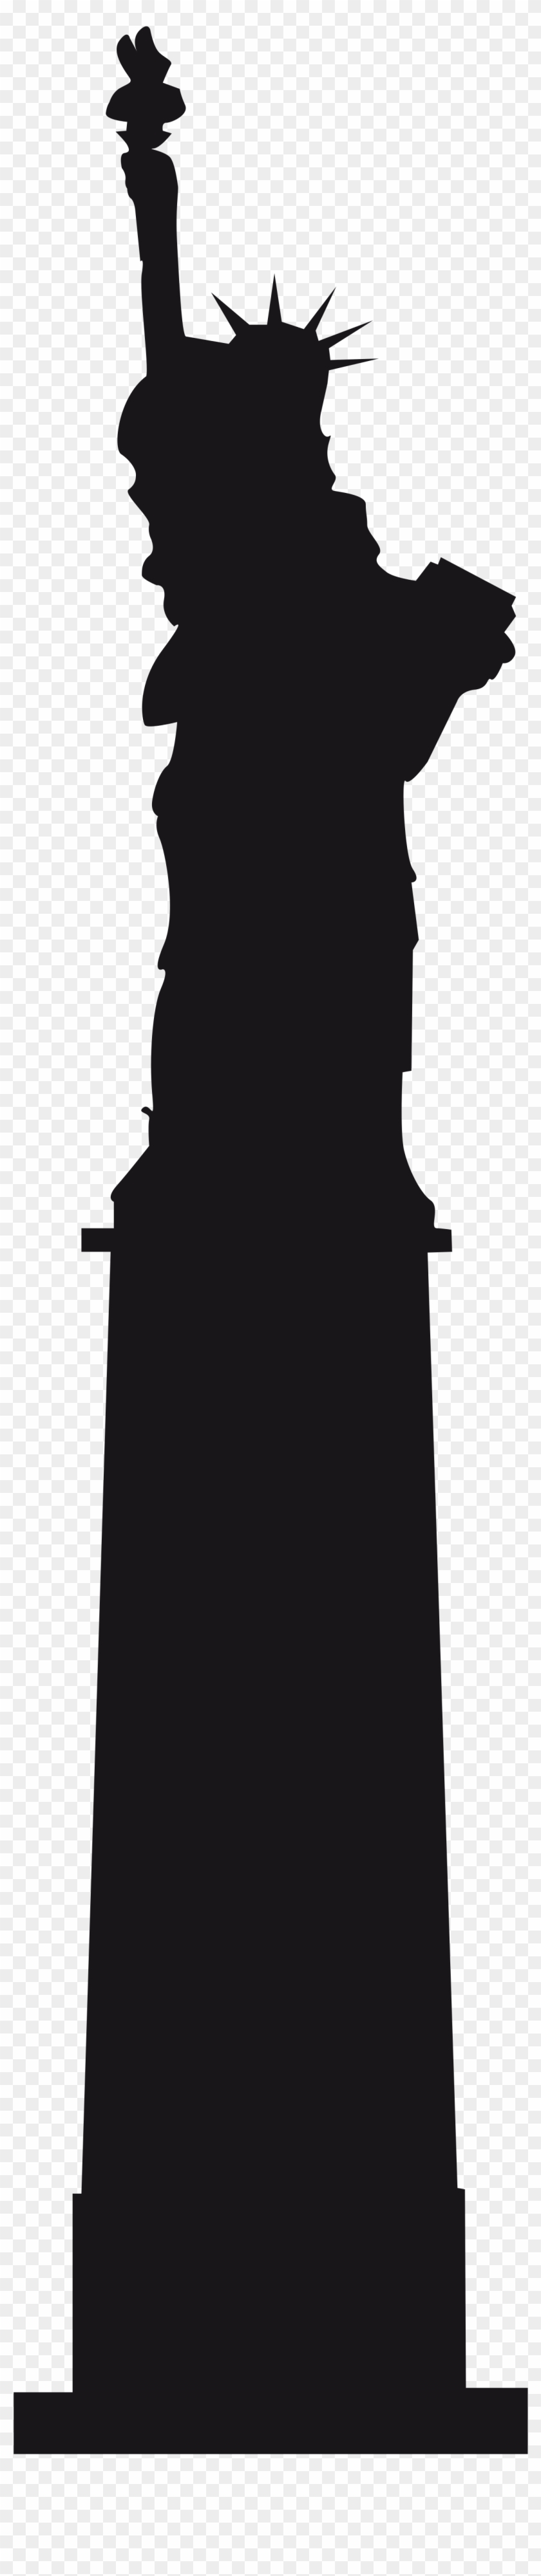 Statue Of Liberty Silhouette Png